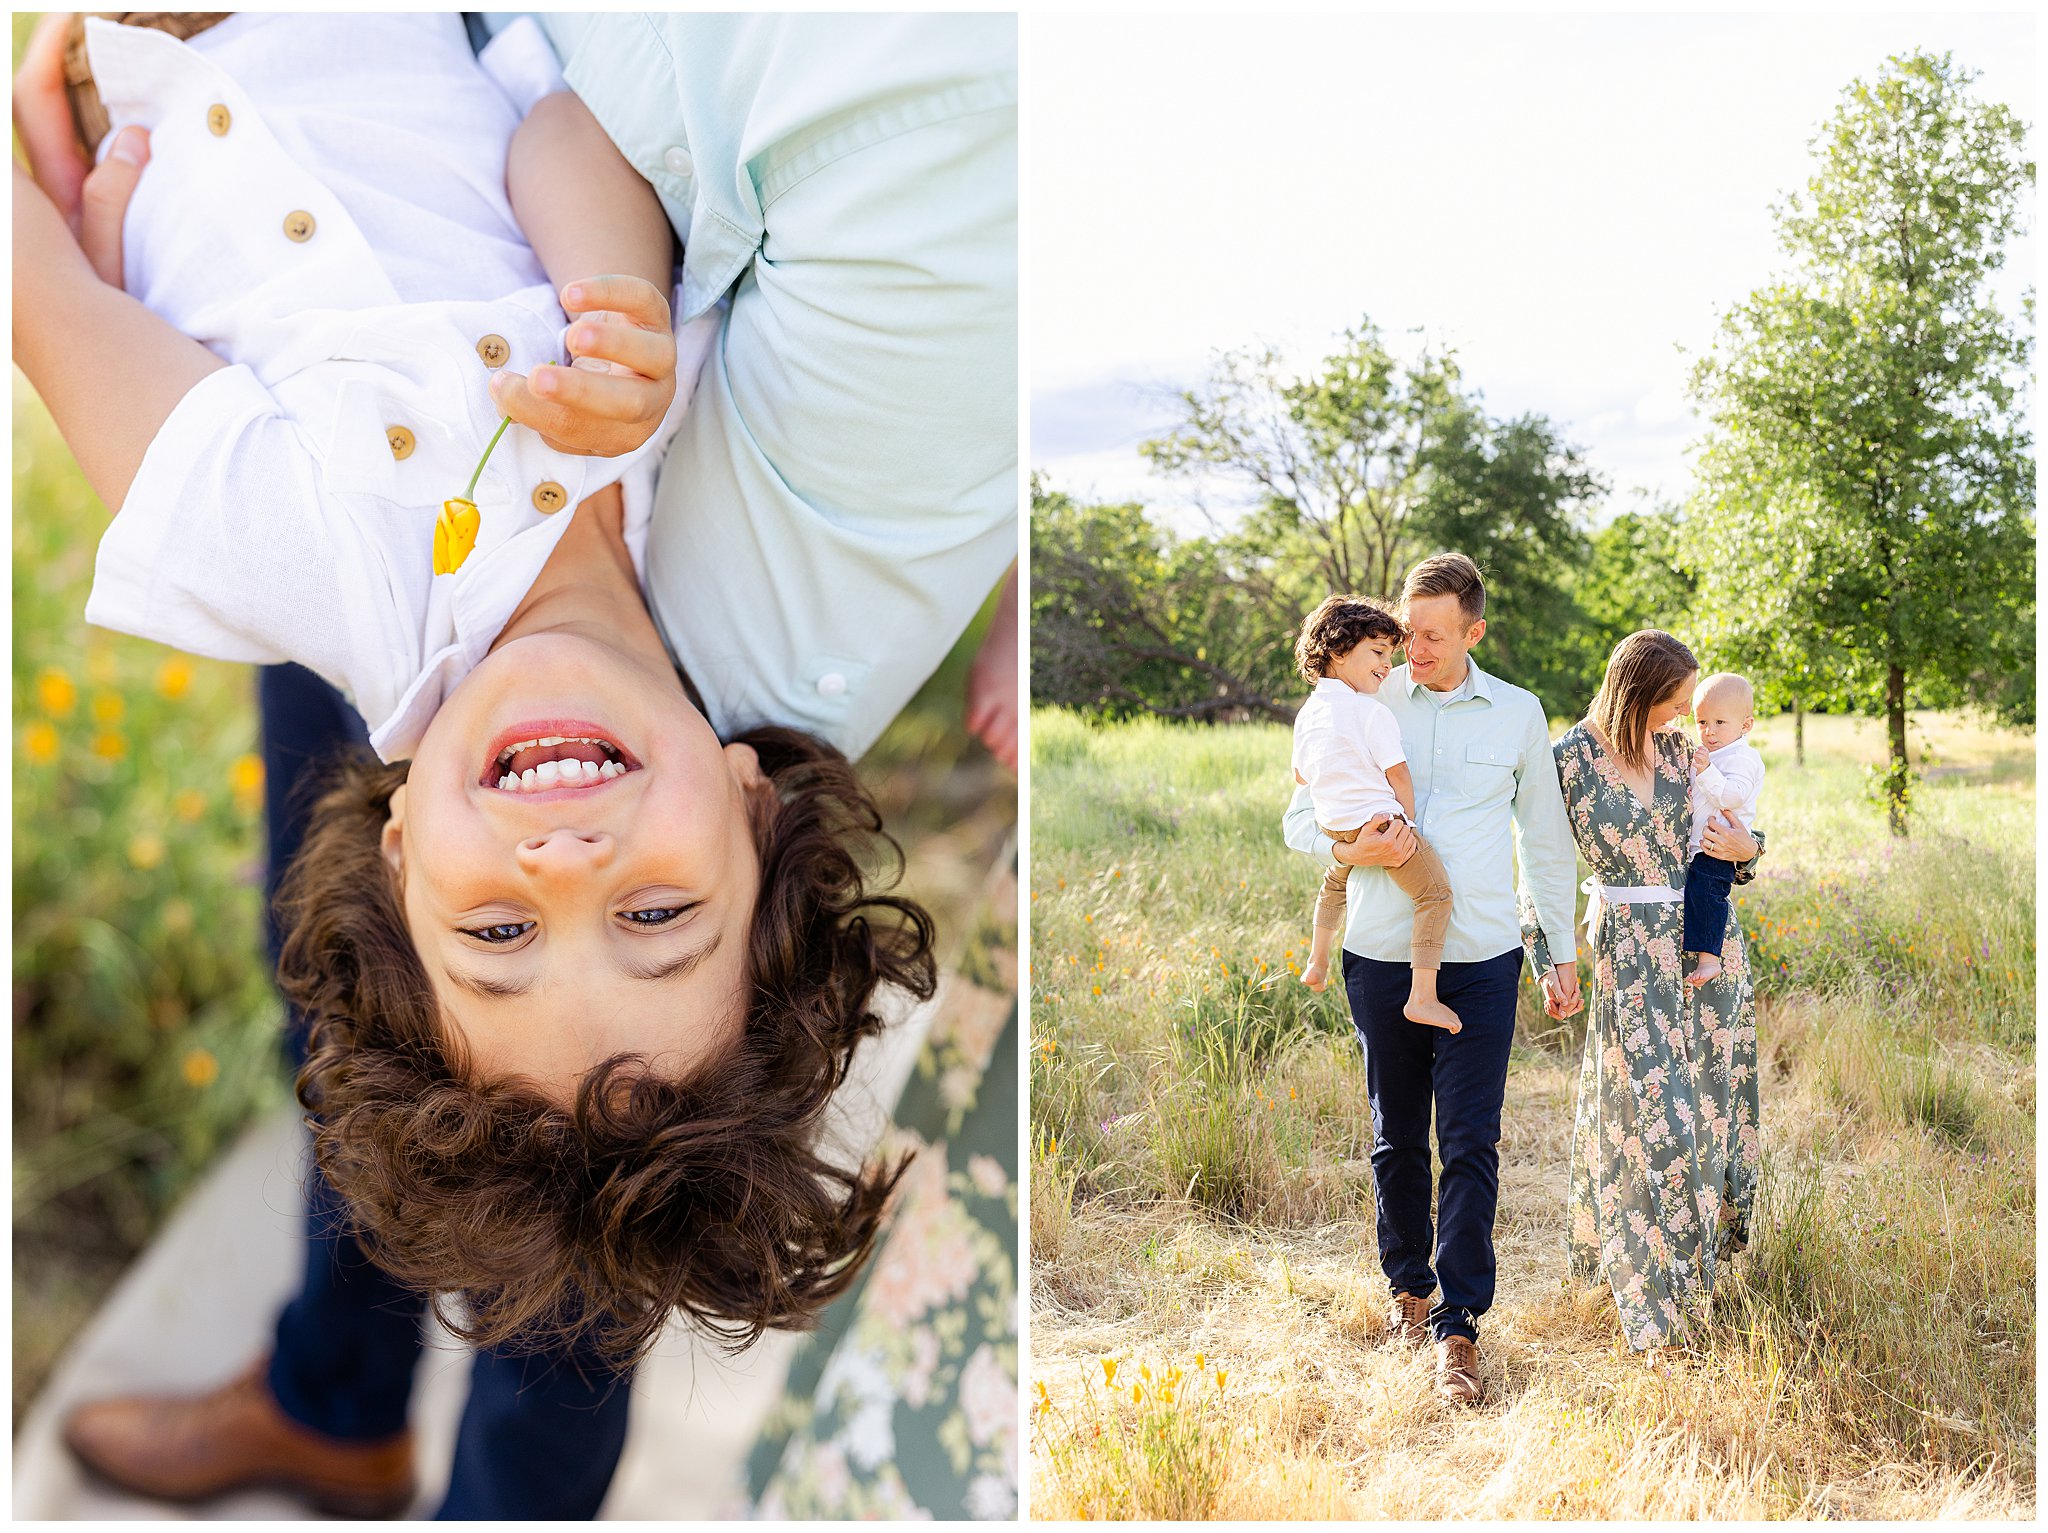 Grass Field Wildflowers Family Session California Poppy Chico CA May Spring Floral Dress Young Boys Brothers Blanket,